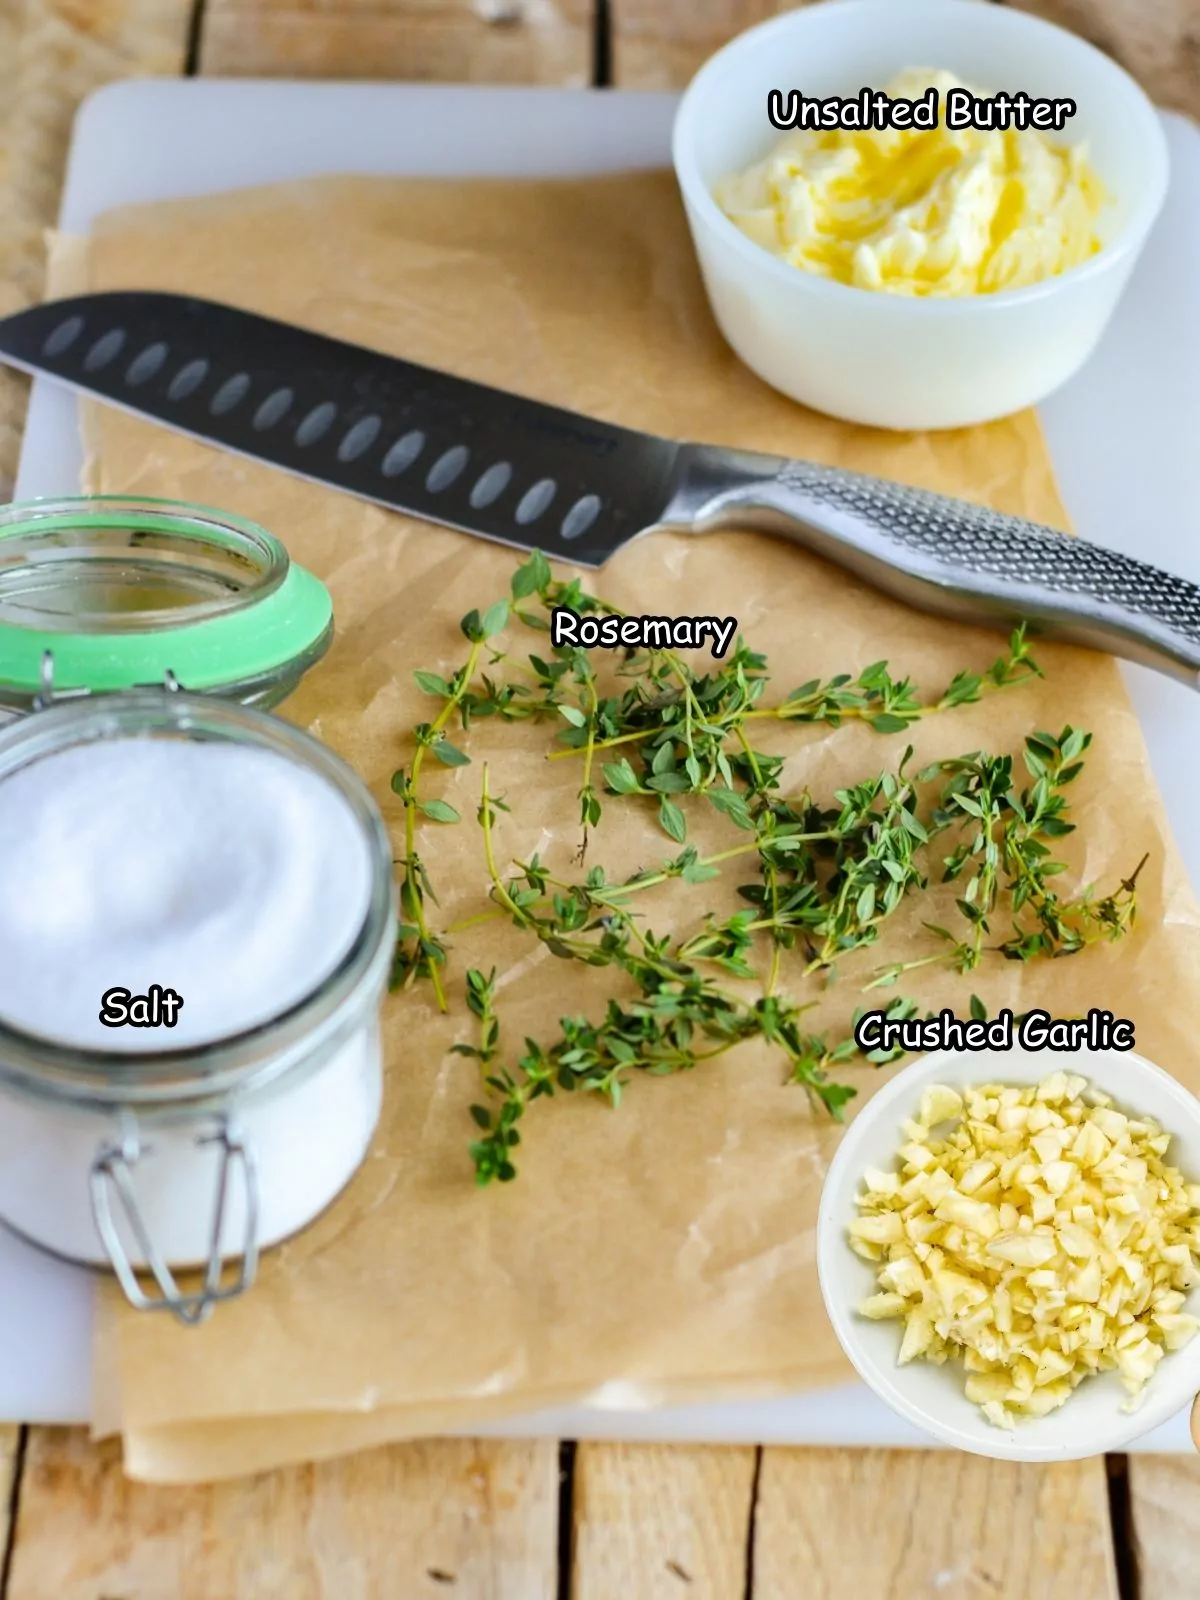 ingredients for herb butter.